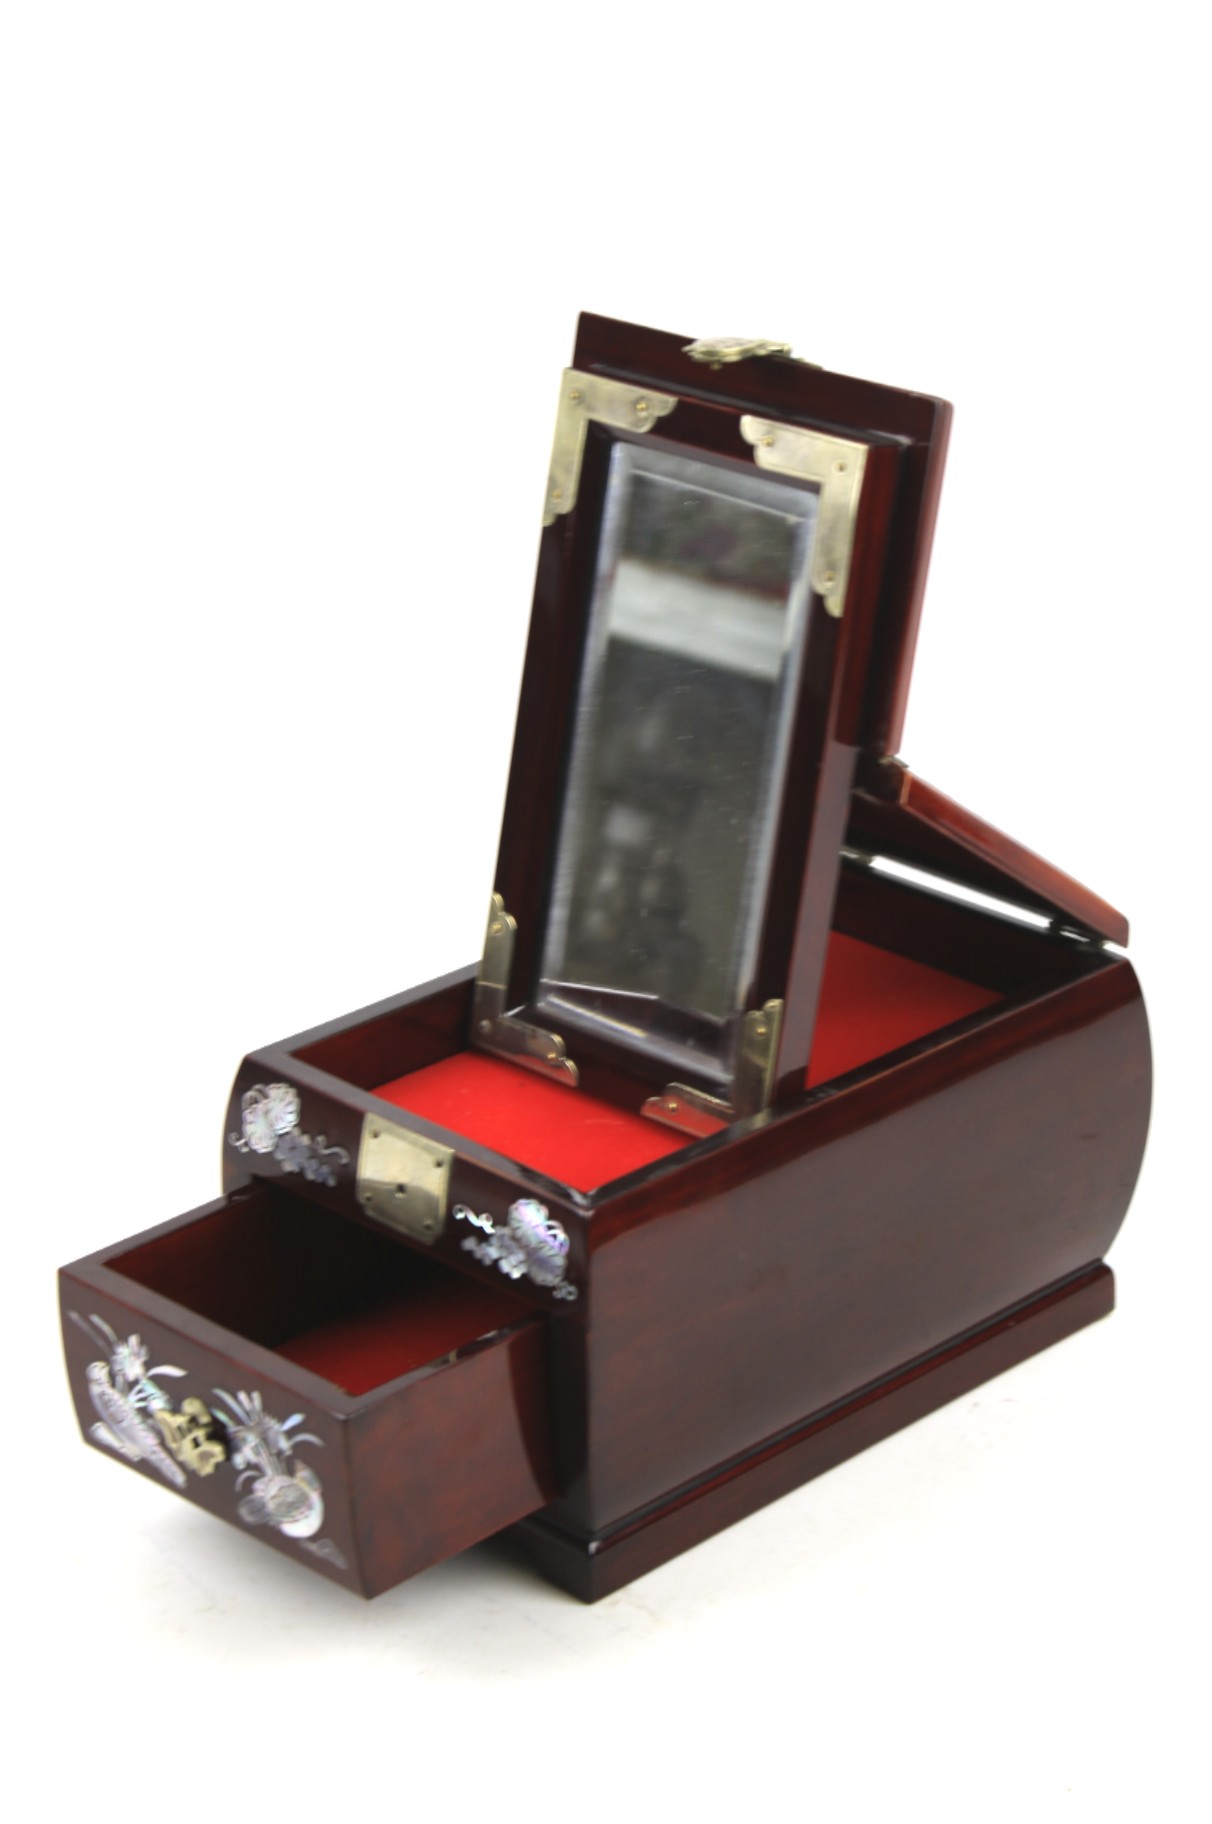 Oriental style jewellery box. Inlaid with decoration compartment contains mirror on top of drawer. - Image 2 of 2